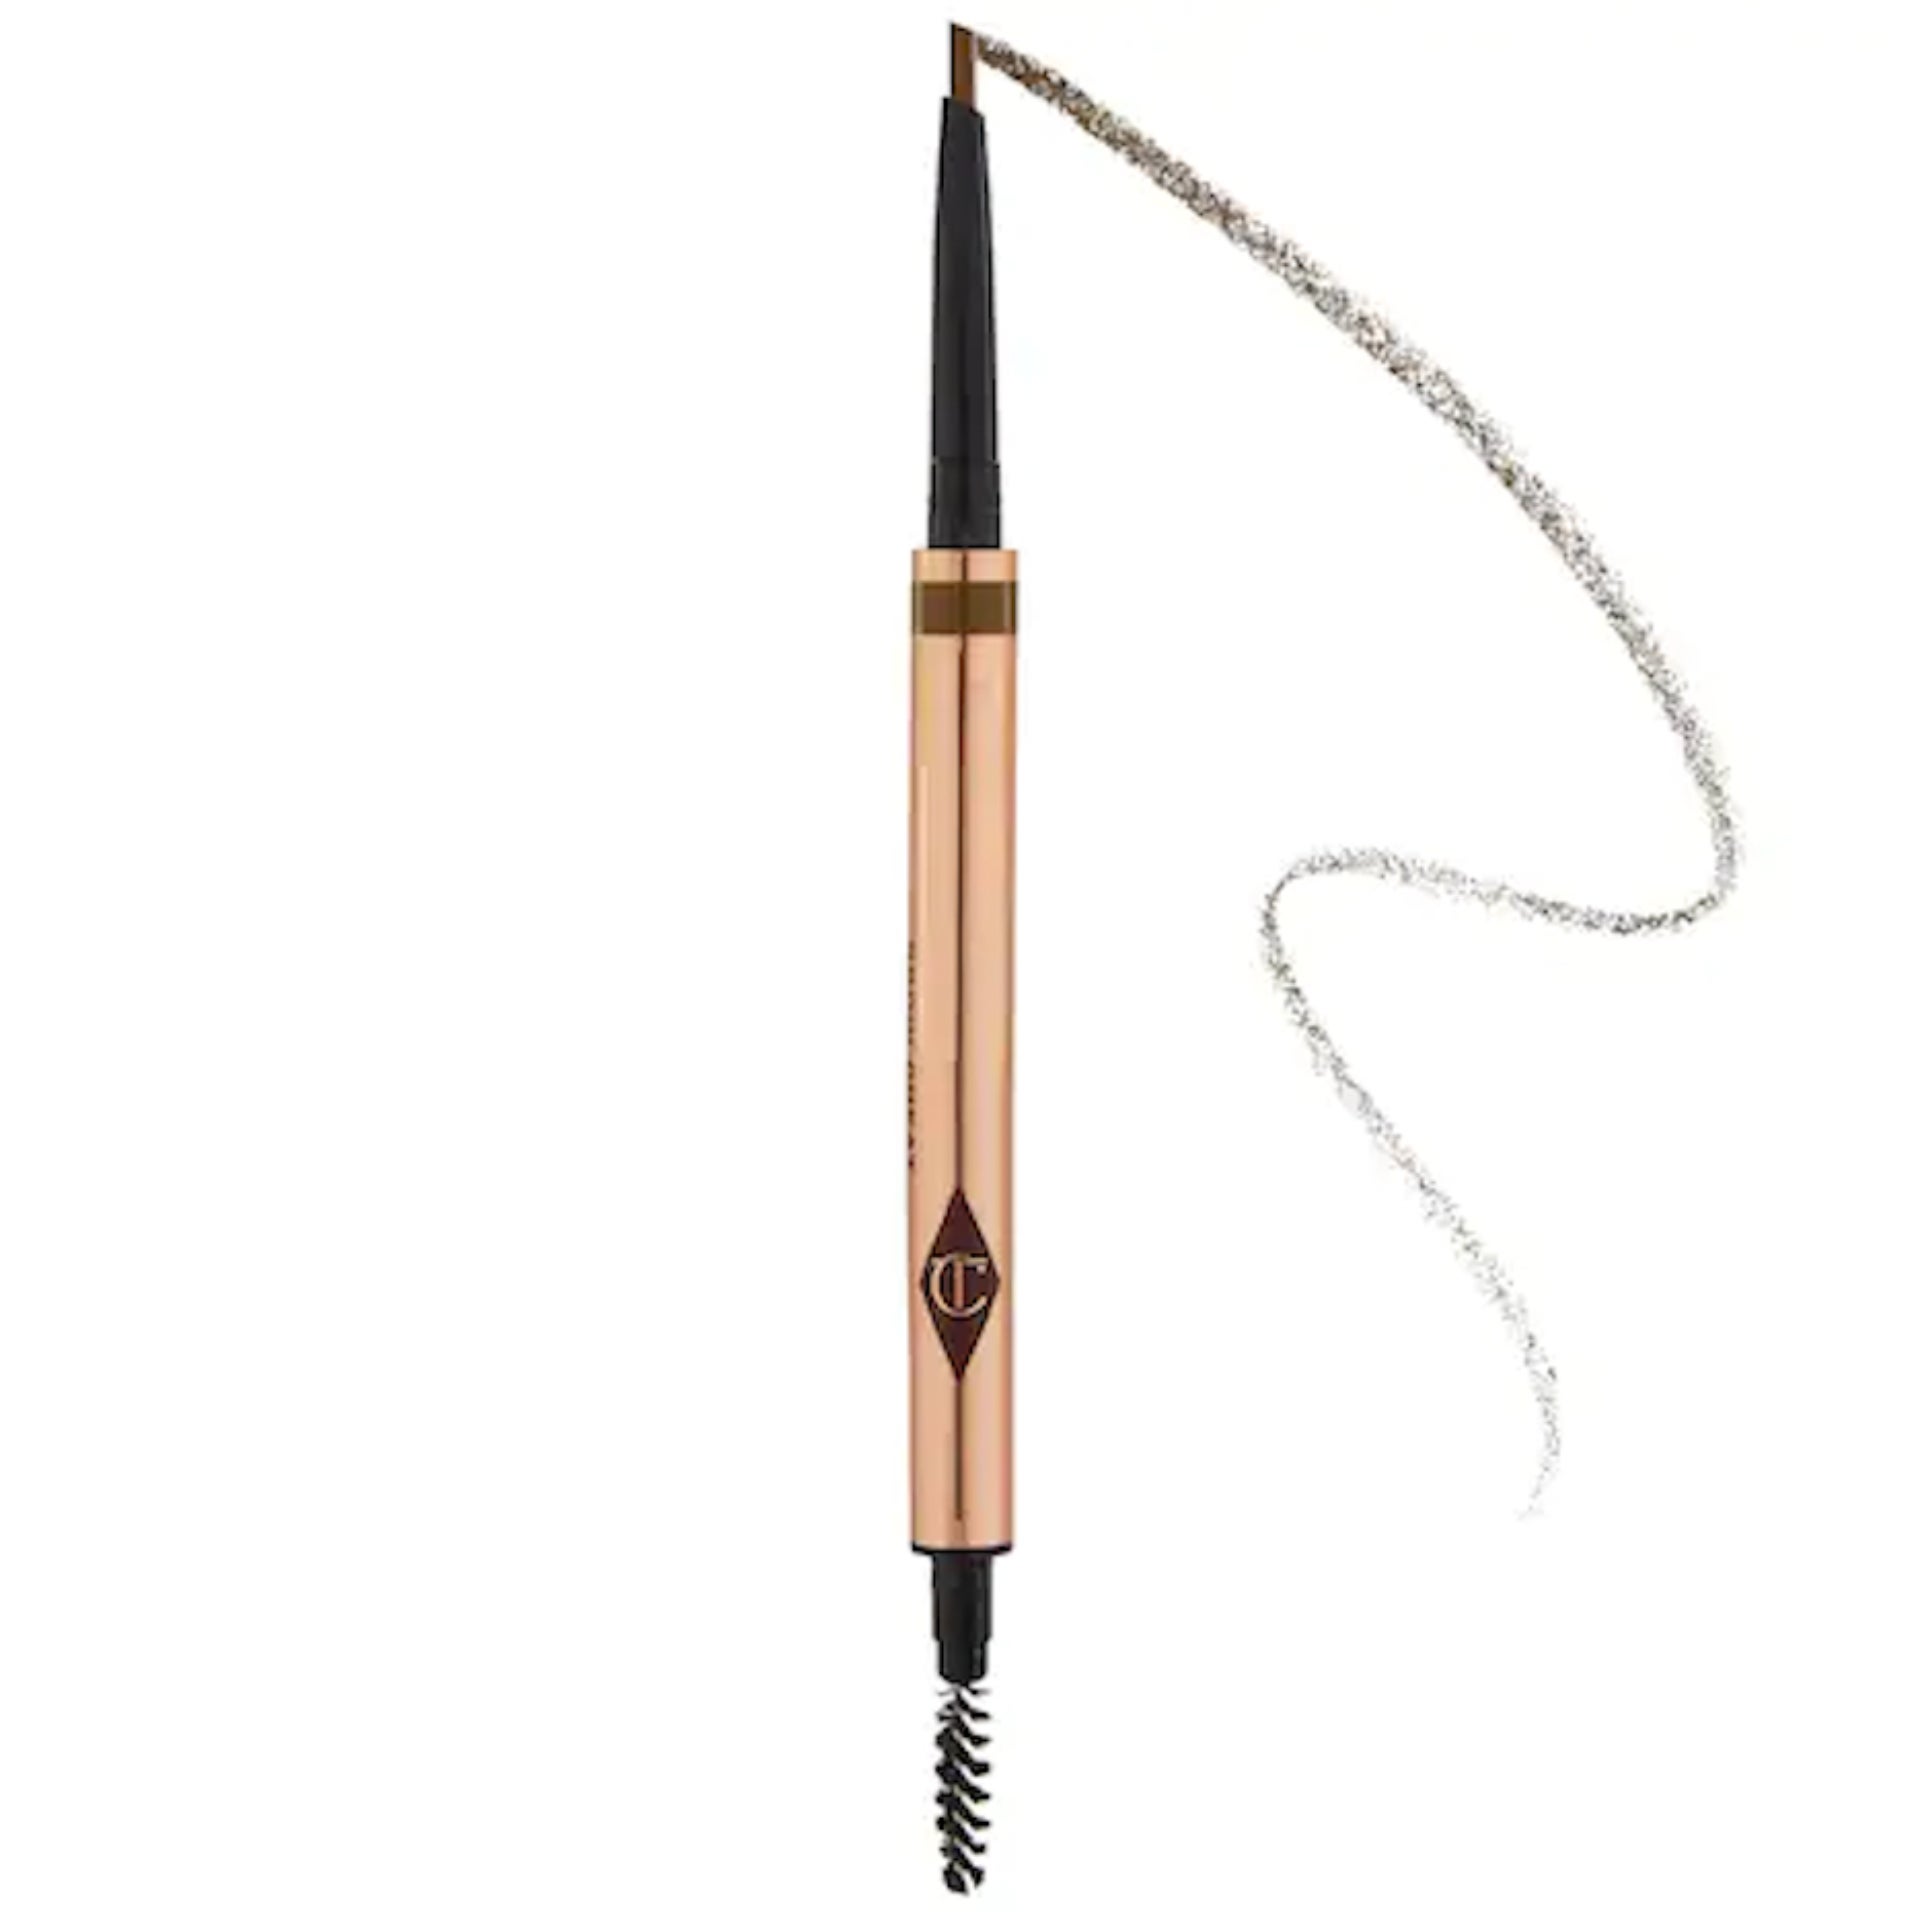 Your Guide To Charlotte Tilbury's Most Popular Products At Sephora